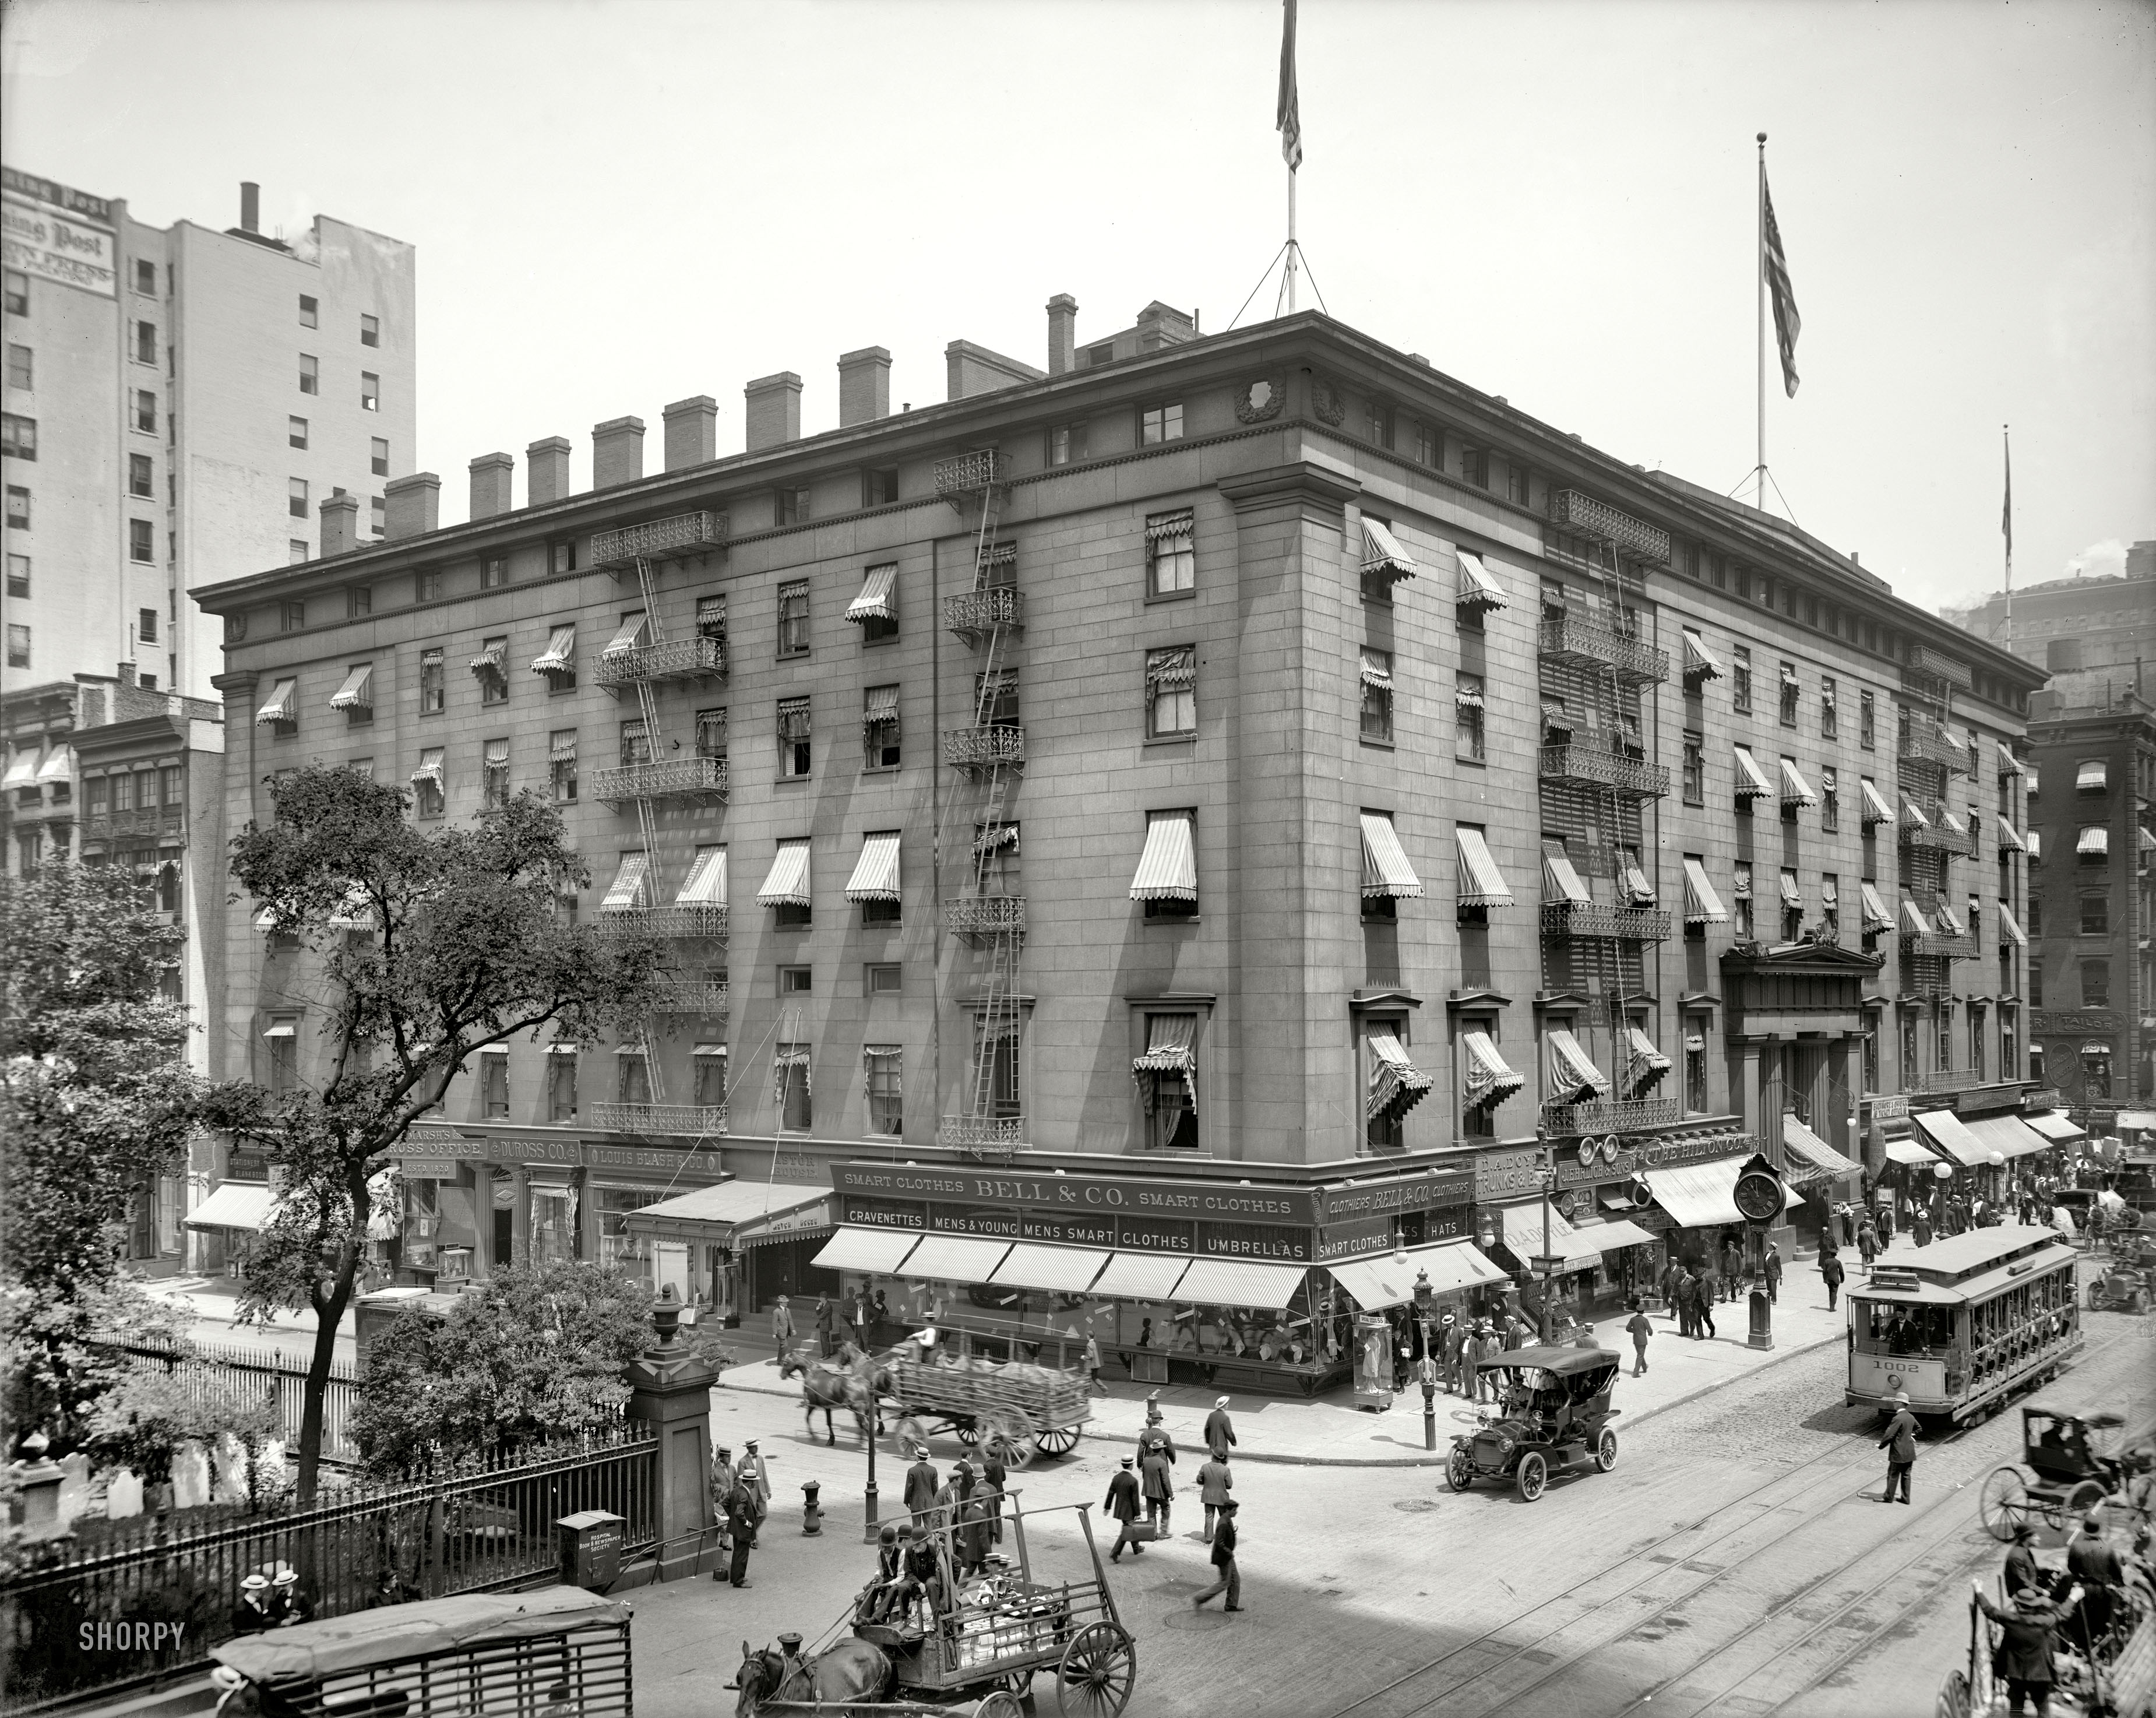 New York circa 1908. "Astor House, Vesey Street and Broadway." The hotel, built by the financier John Jacob Astor in 1836, was home to presidents and potentates over its long history. 8x10 inch glass negative. View full size.